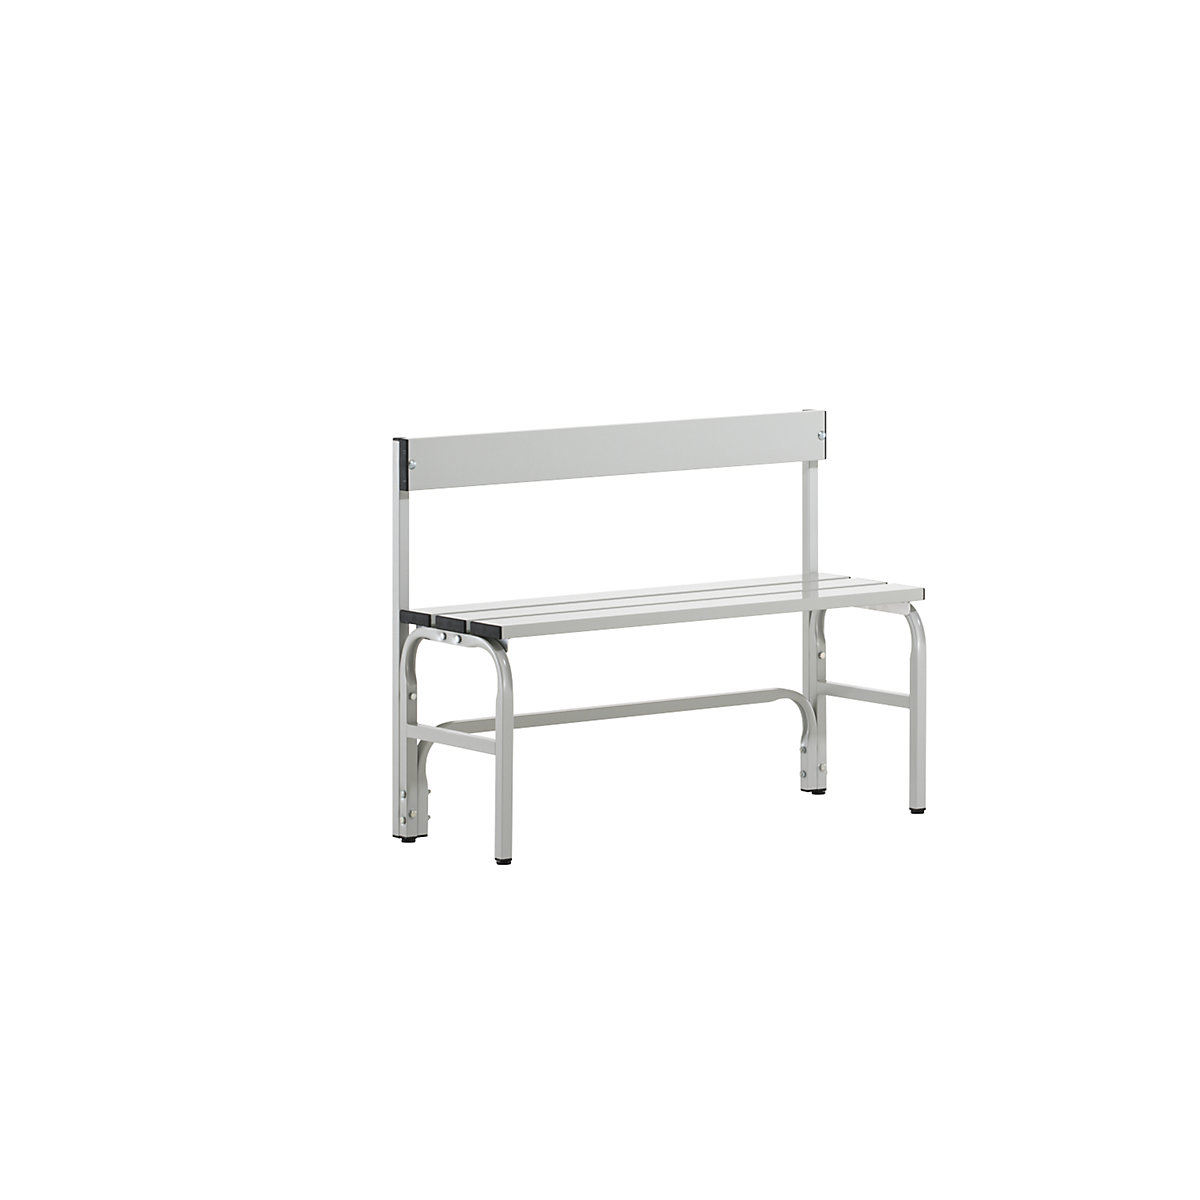 Sypro – Half height cloakroom bench with back rest, single-sided, aluminium, length 1015 mm, light grey